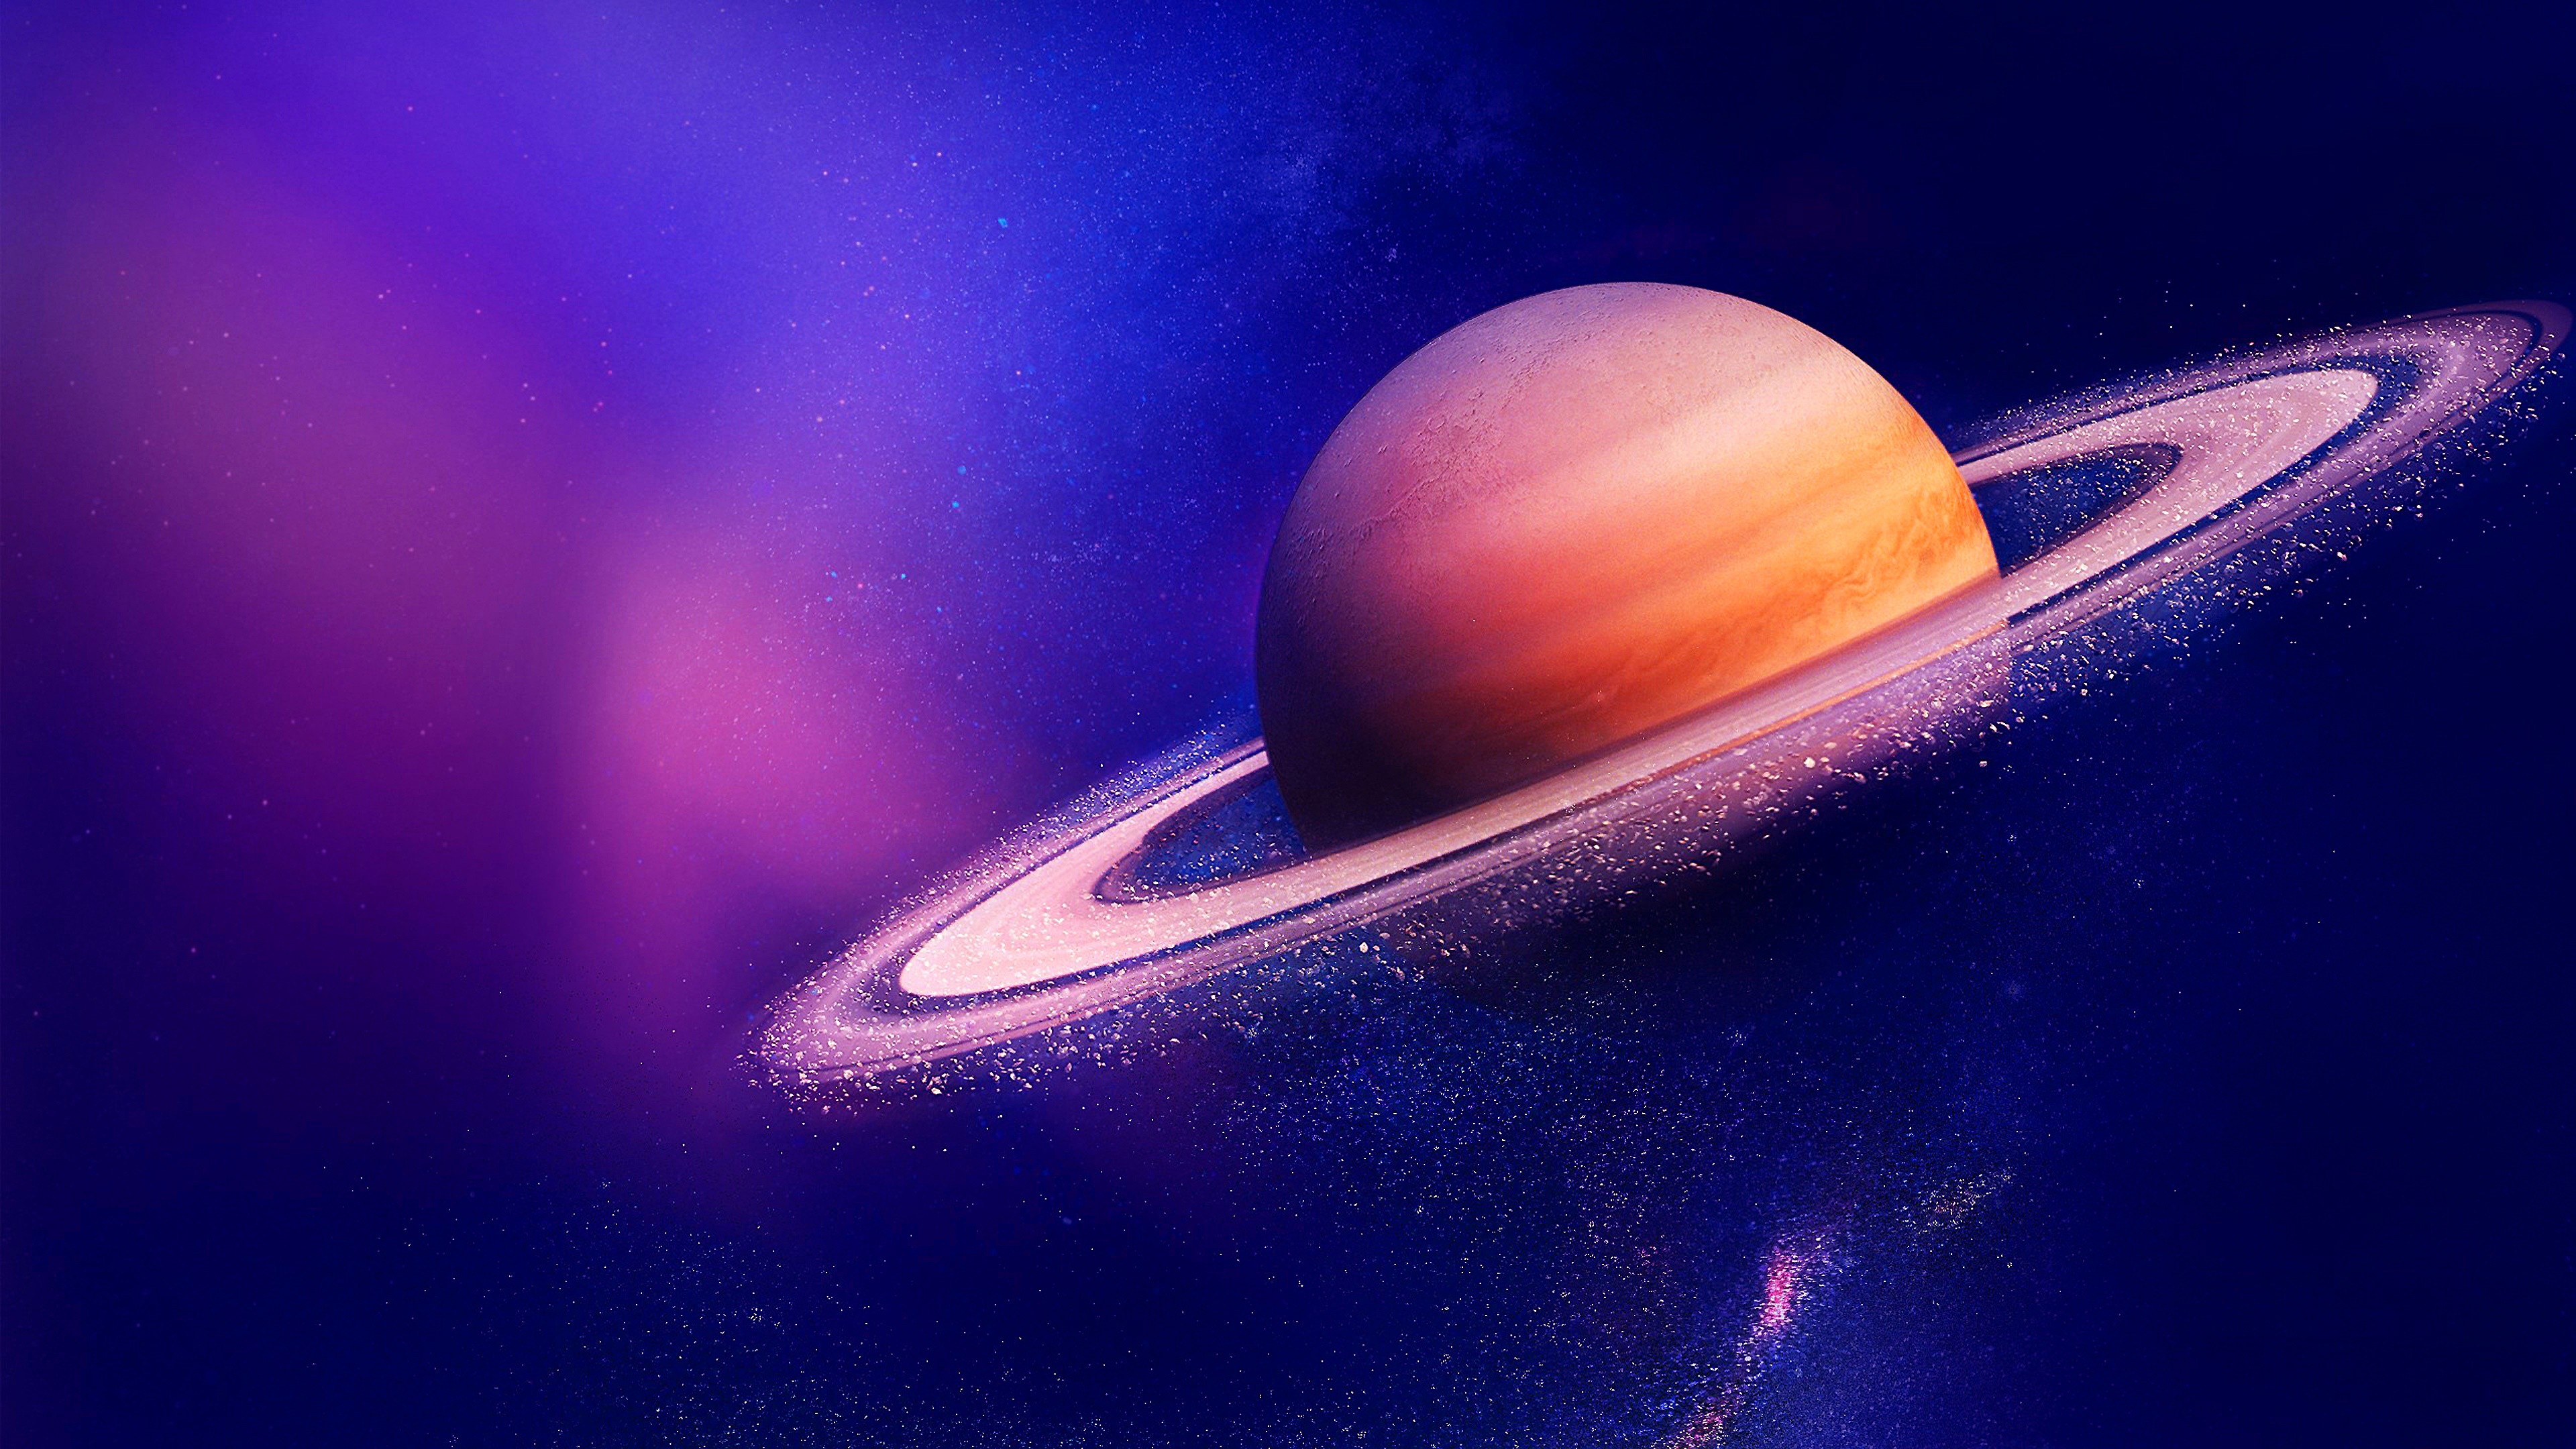 Saturn Planet With Its Ring Background, New Saturn Pictures Background Image  And Wallpaper for Free Download